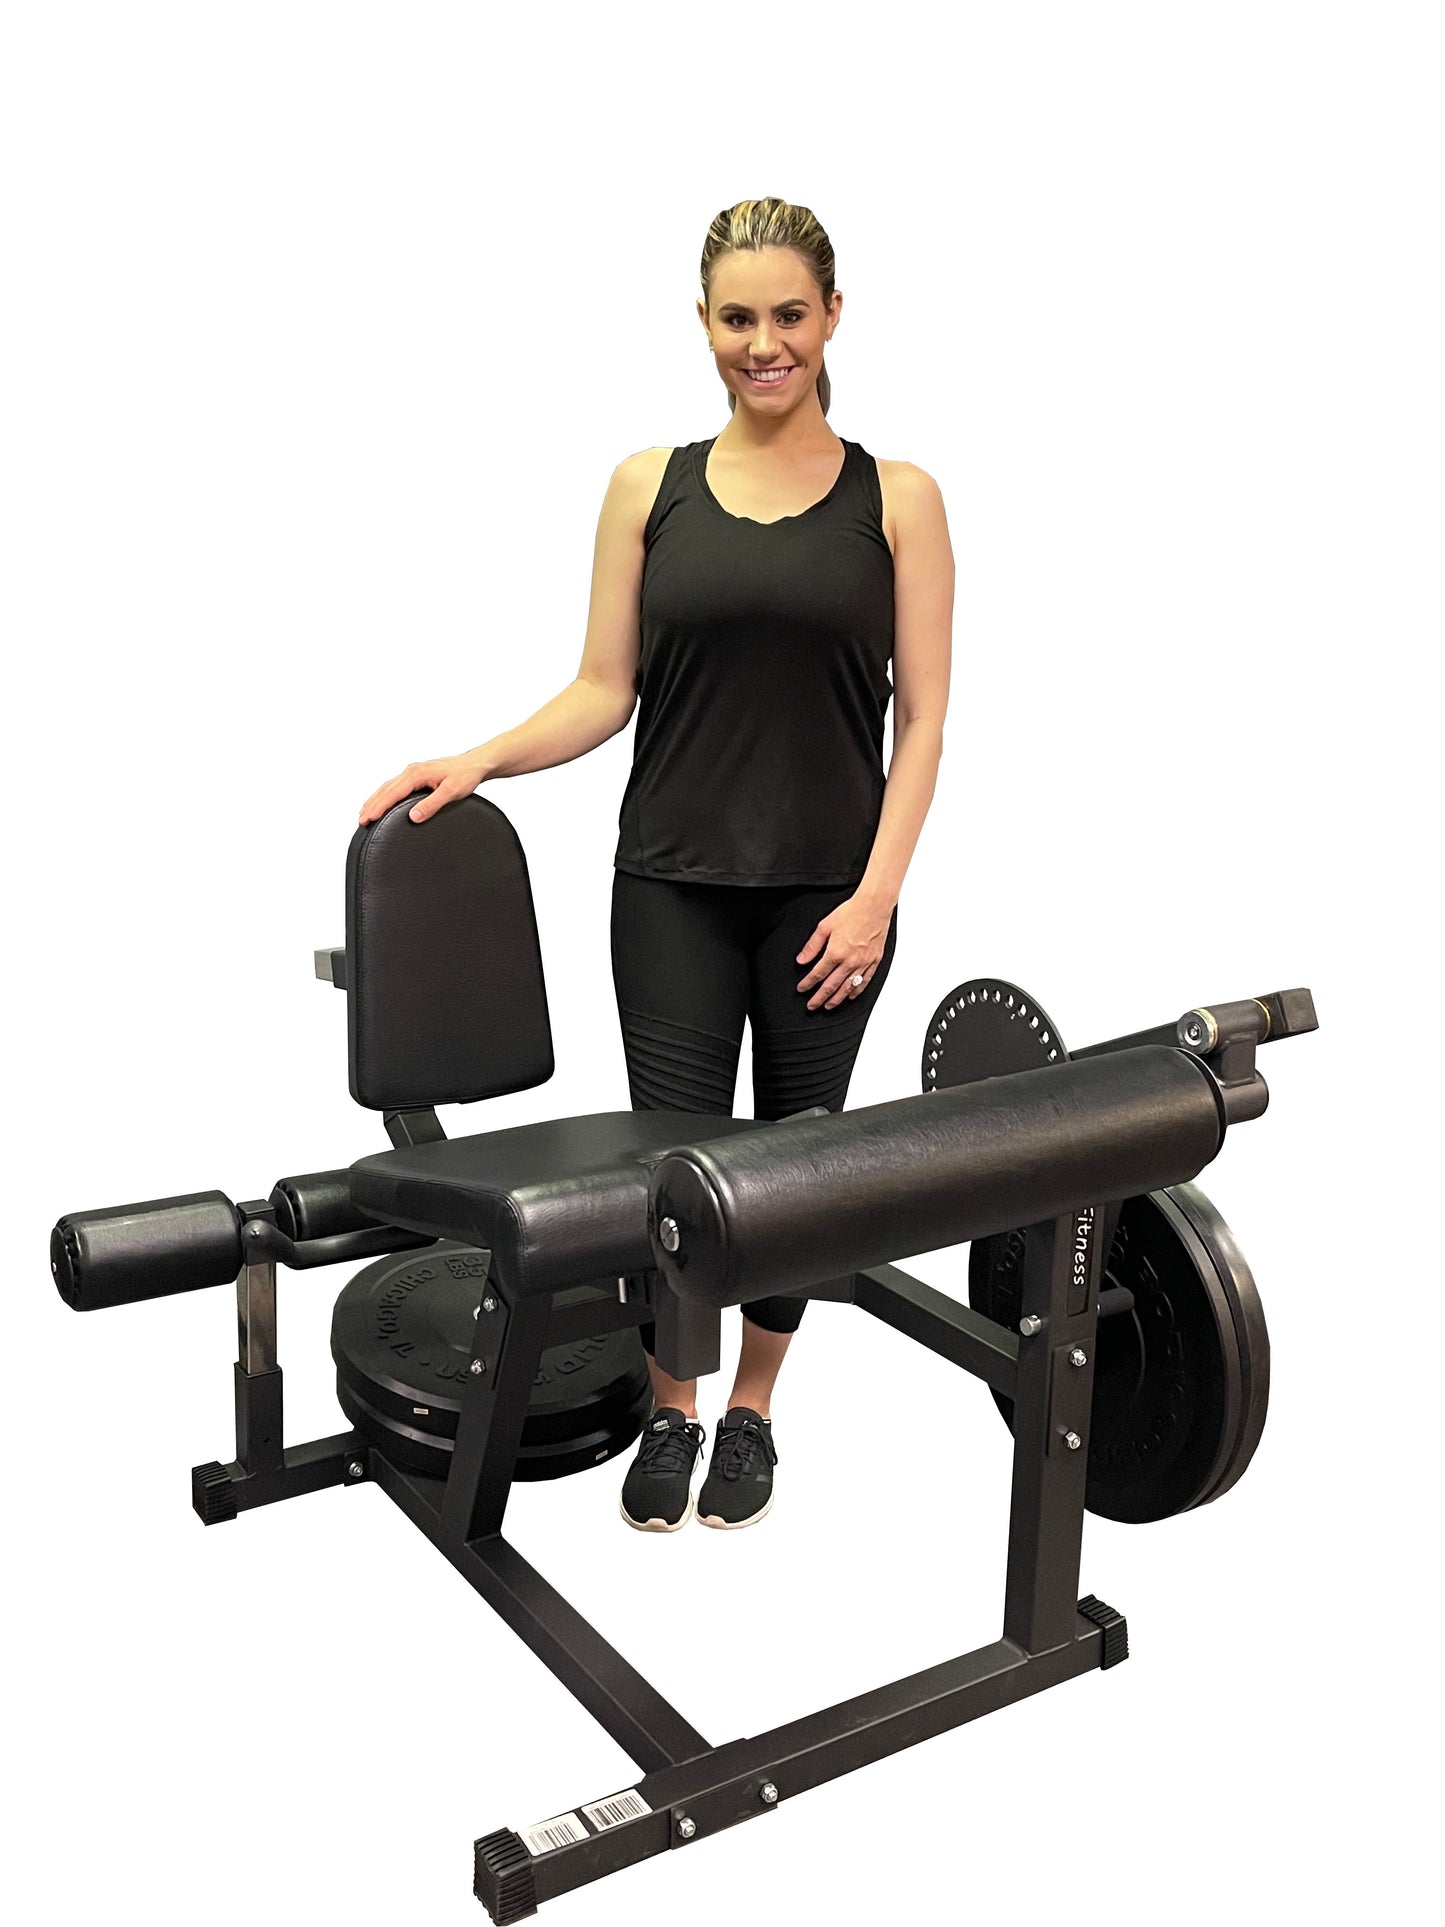 SB Fitness LELC700 Commercial Seated Leg Extension/Leg Curl Combo